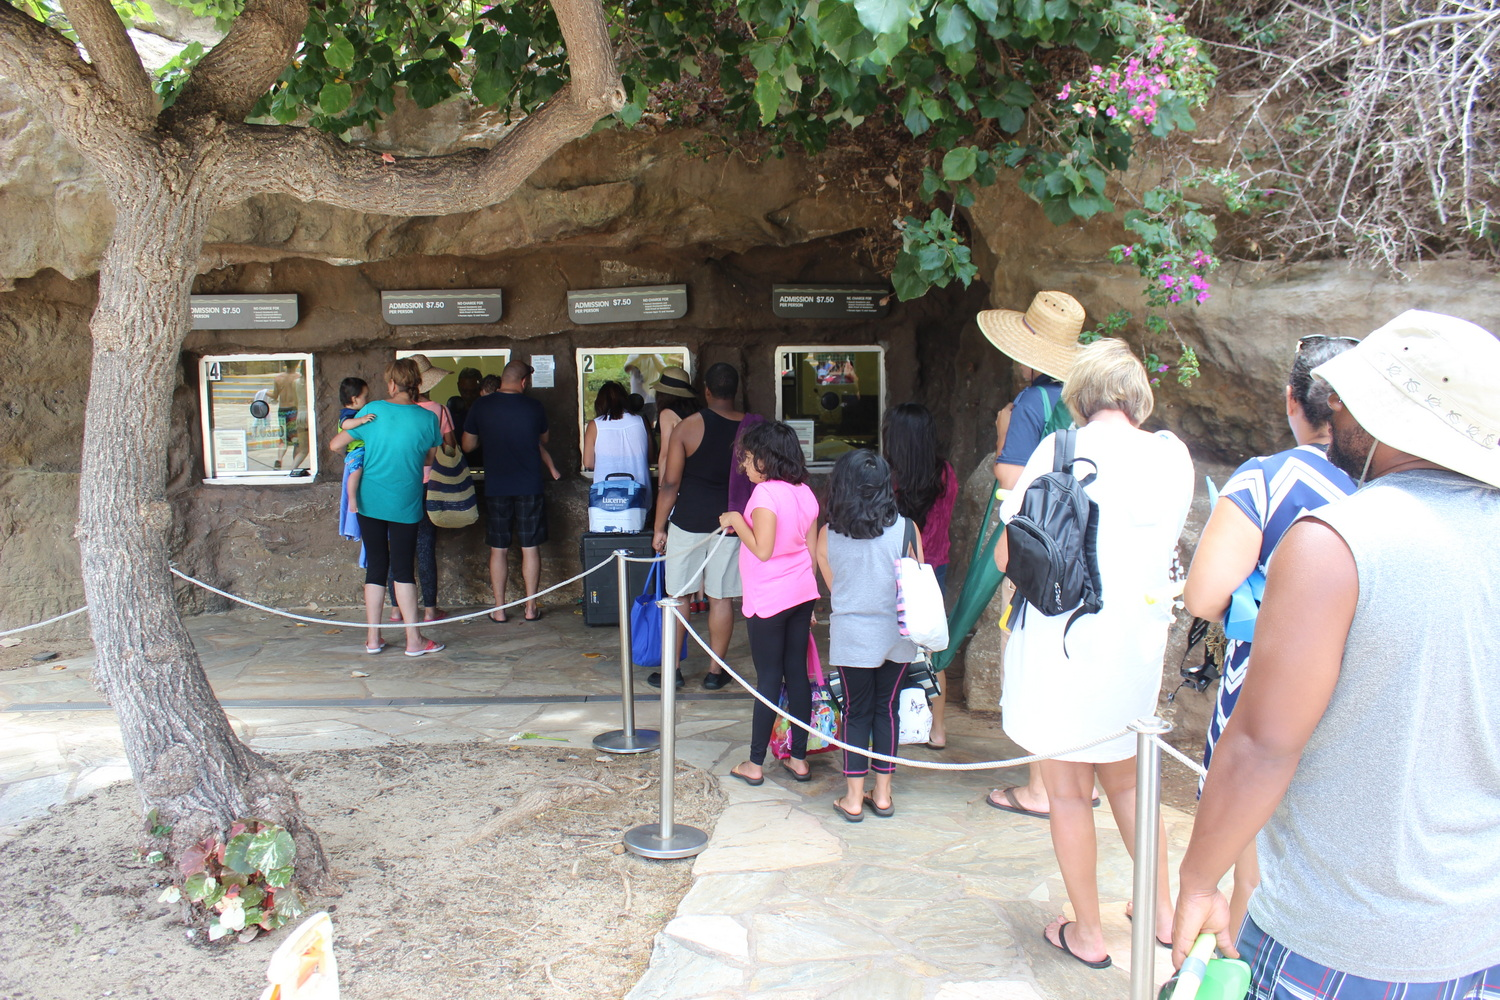 An image of the Hanauma Bay Reservations counter at the Closed Caption Theater and Facilities